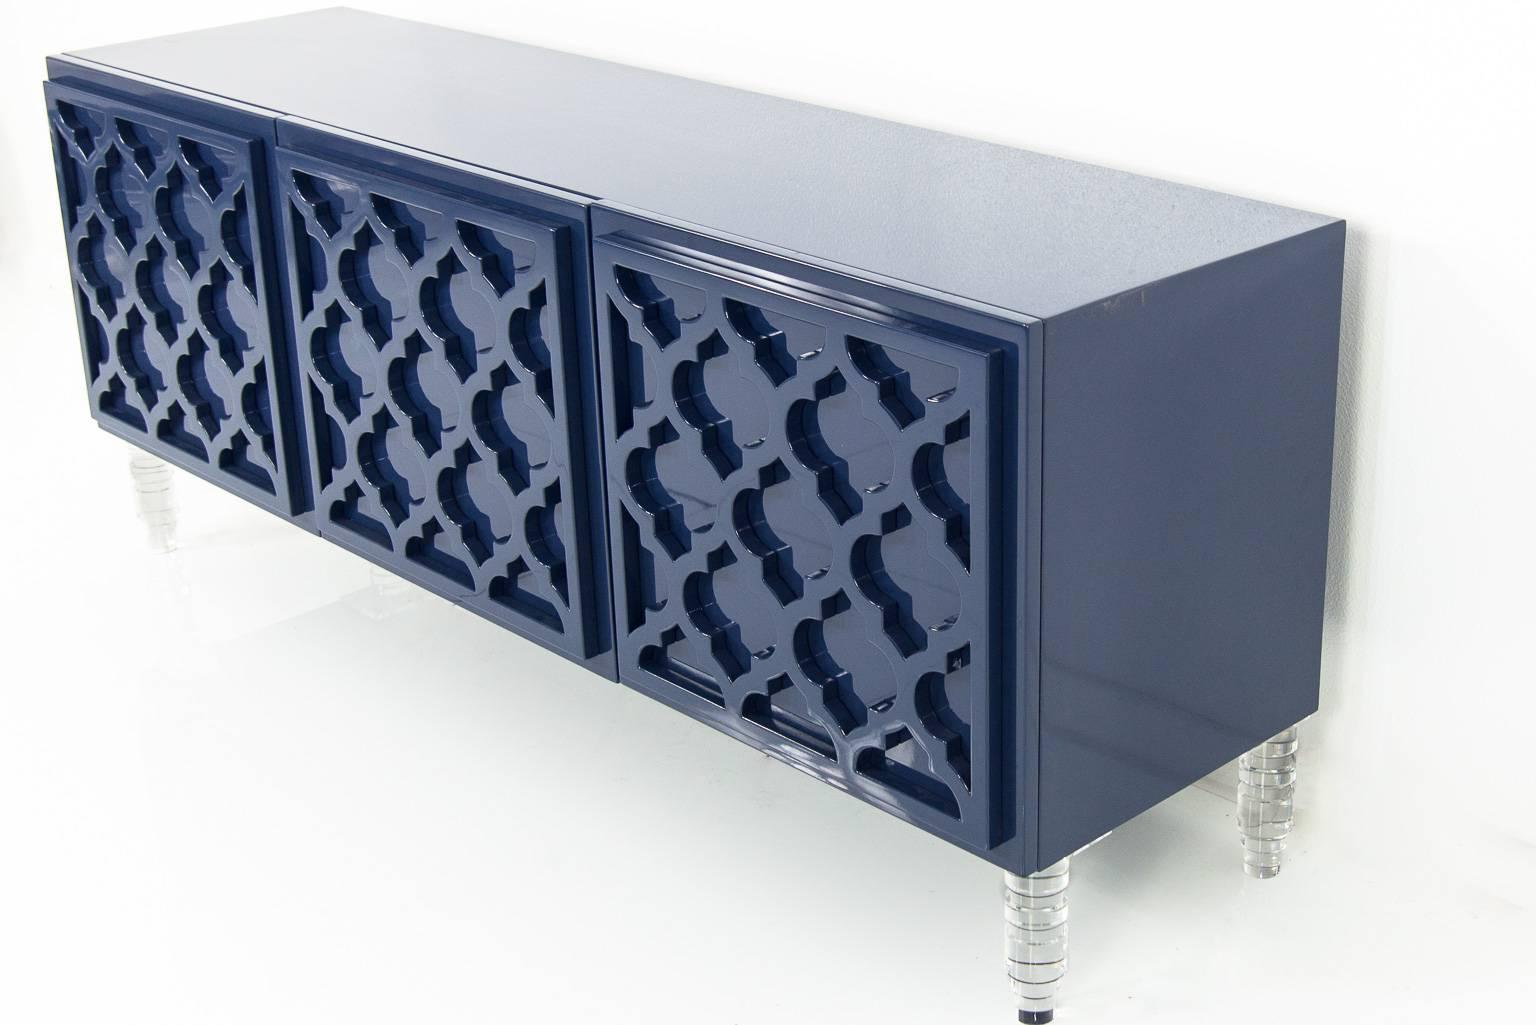 The Tangier 3 Door Credenza is simply stunning. Raised trellis motifs across the entire face of the credenza, as well as the delicate, brass Marrakesh hardware and legs,  add a sense of airy elegance.

Dimensions:
66